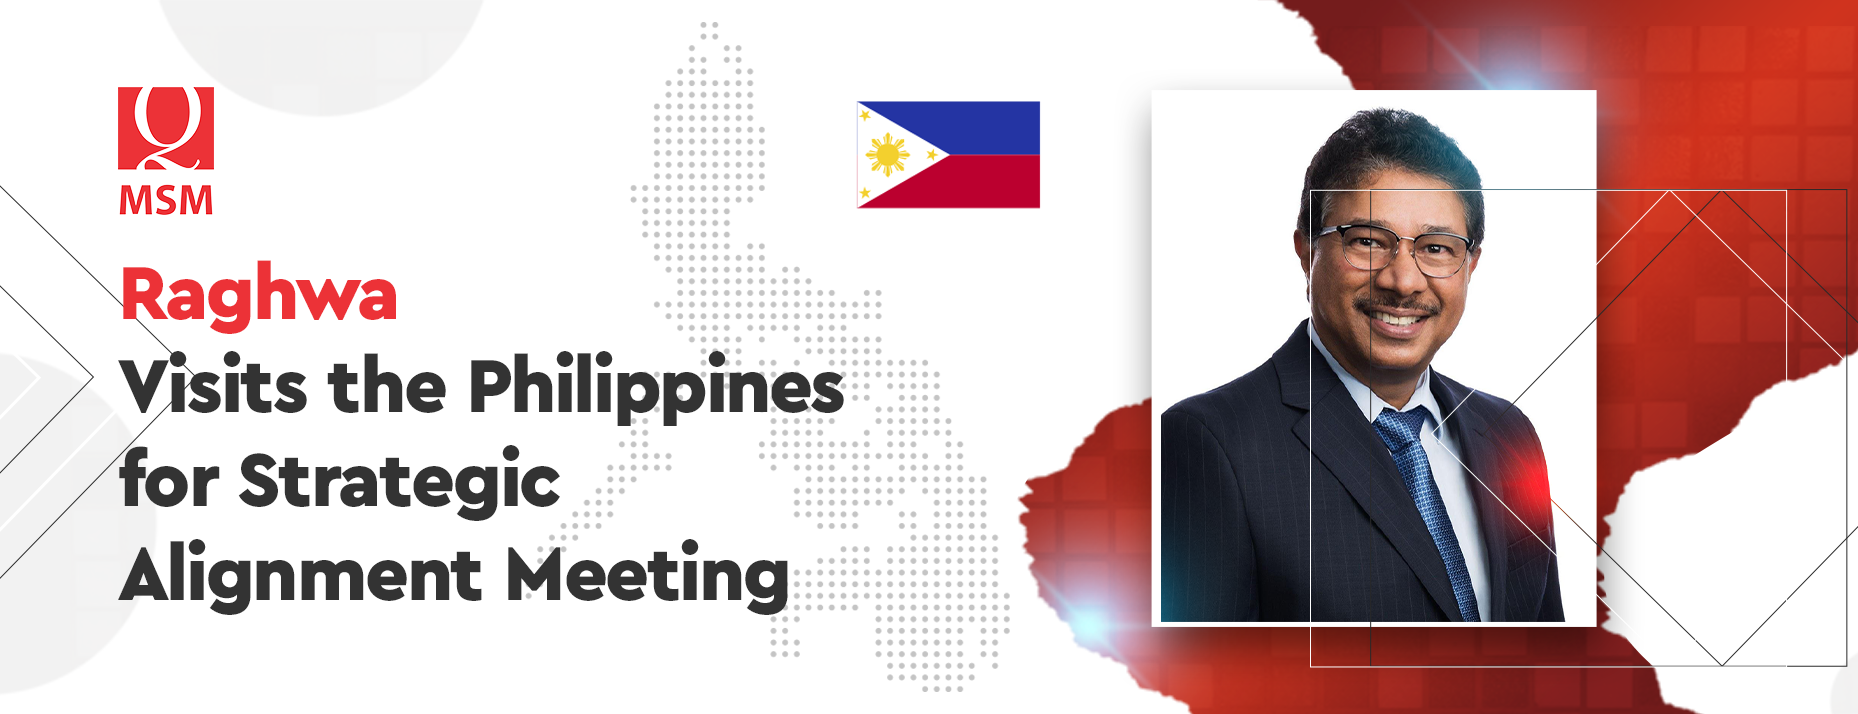 Raghwa Visits the Philippines for Strategic Alignment Meeting